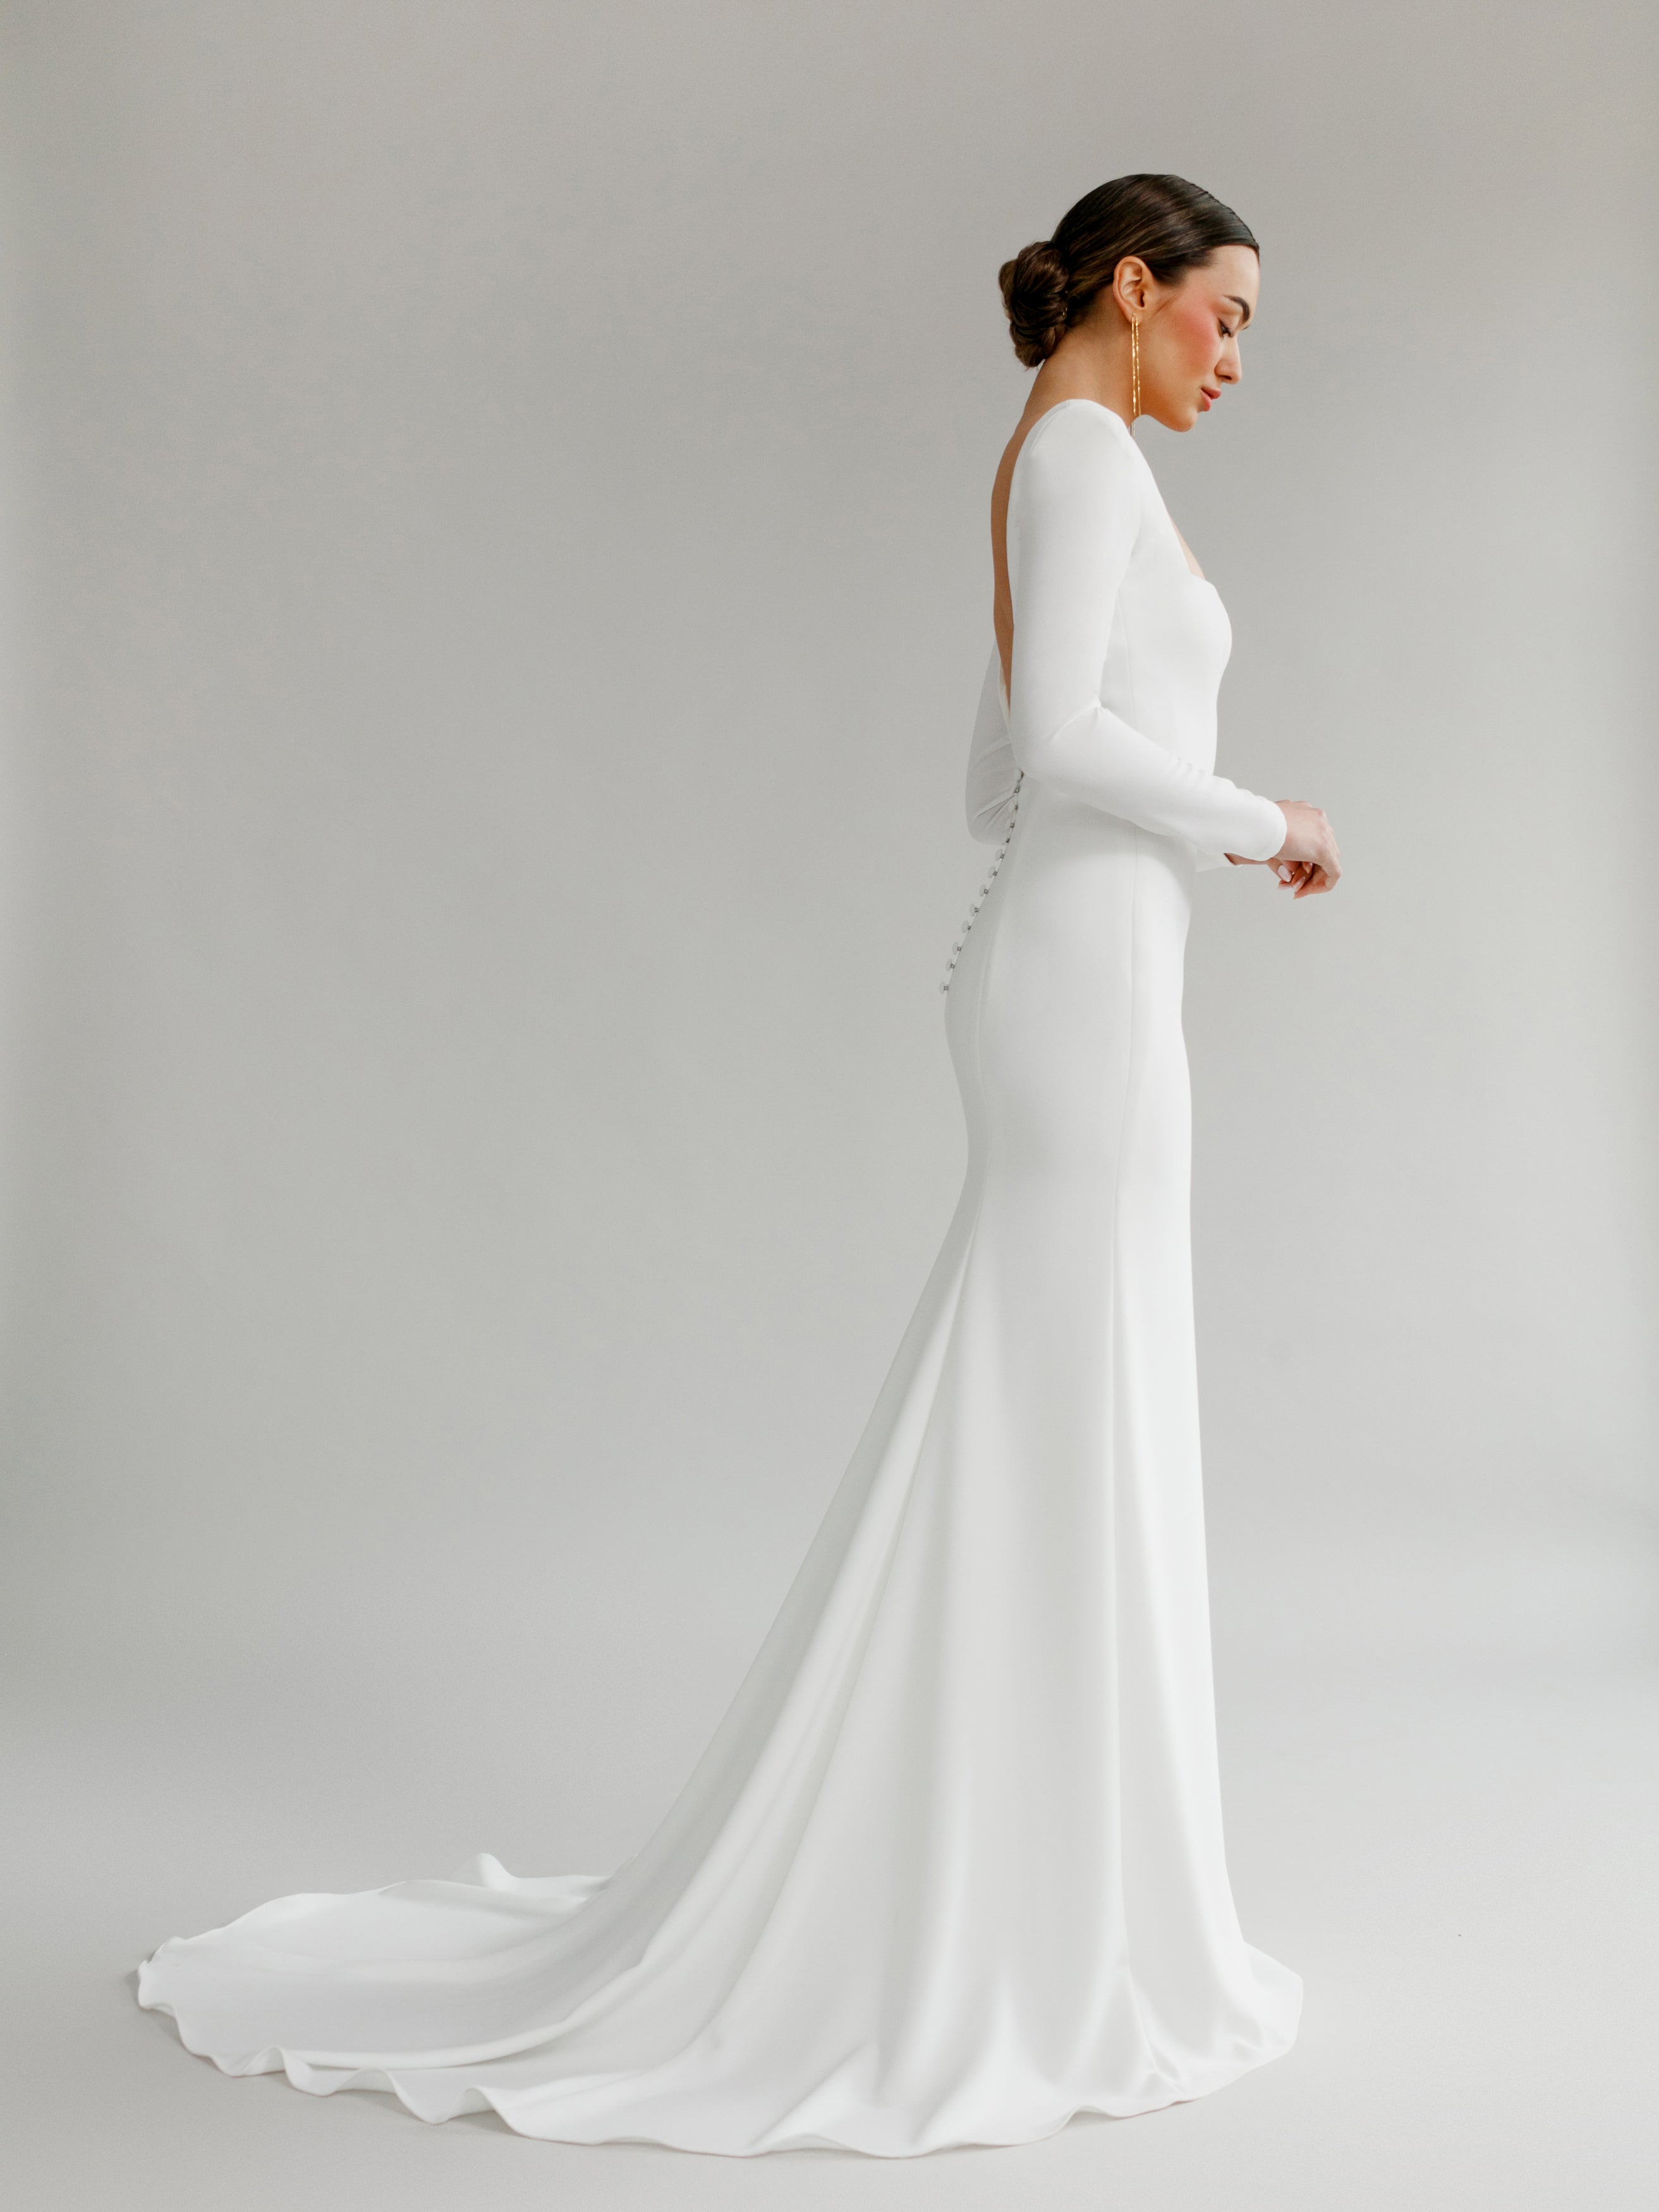 Frida : An elegant wedding gown with long sleeves and a square neck ...